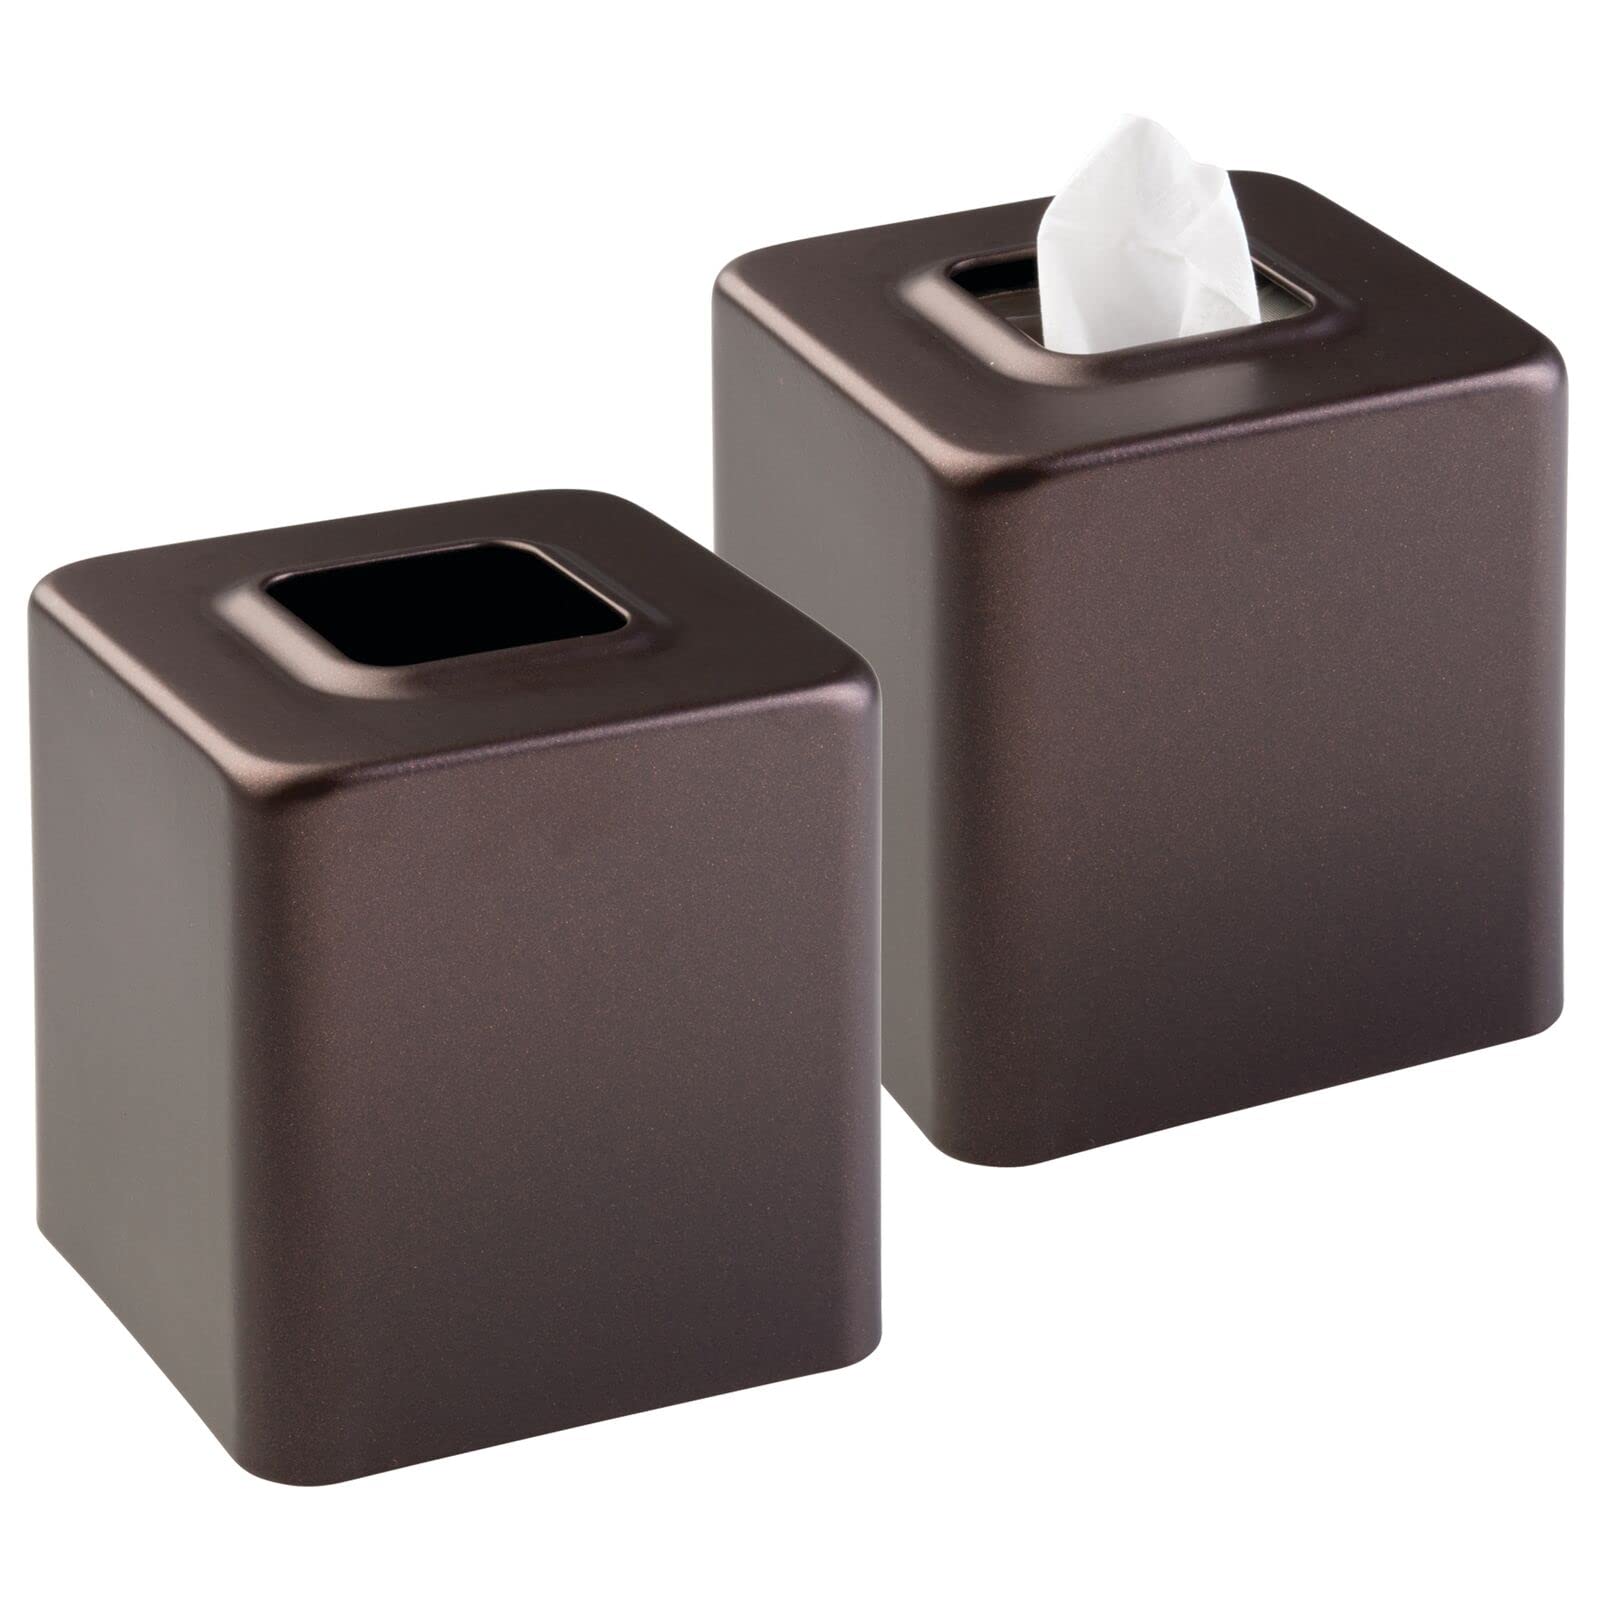 Book Cover mDesign Metal Square Tissue Box Cover, Modern Facial Paper Holder, Accessories for Bathroom Vanity Countertop, Bedroom Dresser, Night Stand, Desk, Office, End Table, Unity Collection - 2 Pack - Bronze